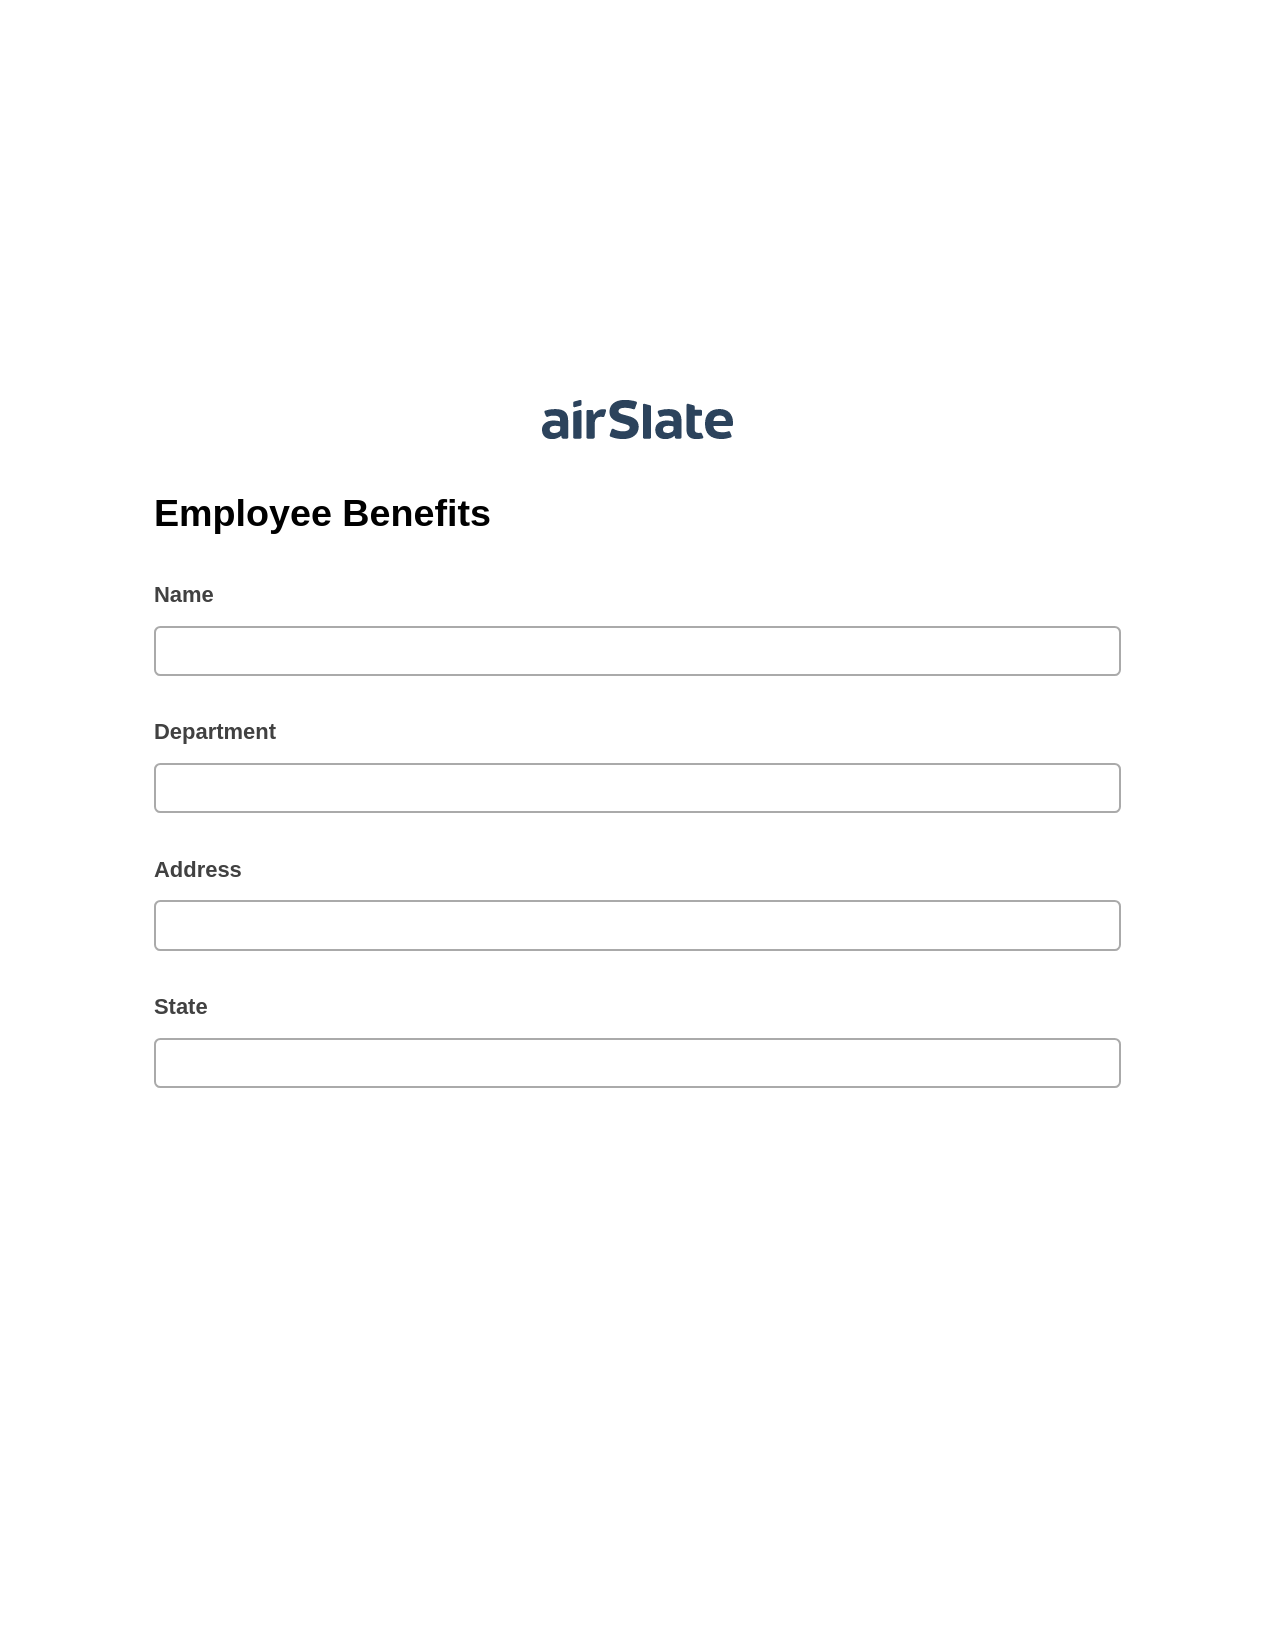 Employee Benefits Pre-fill from MySQL Bot, Create slate bot, Export to NetSuite Record Bot